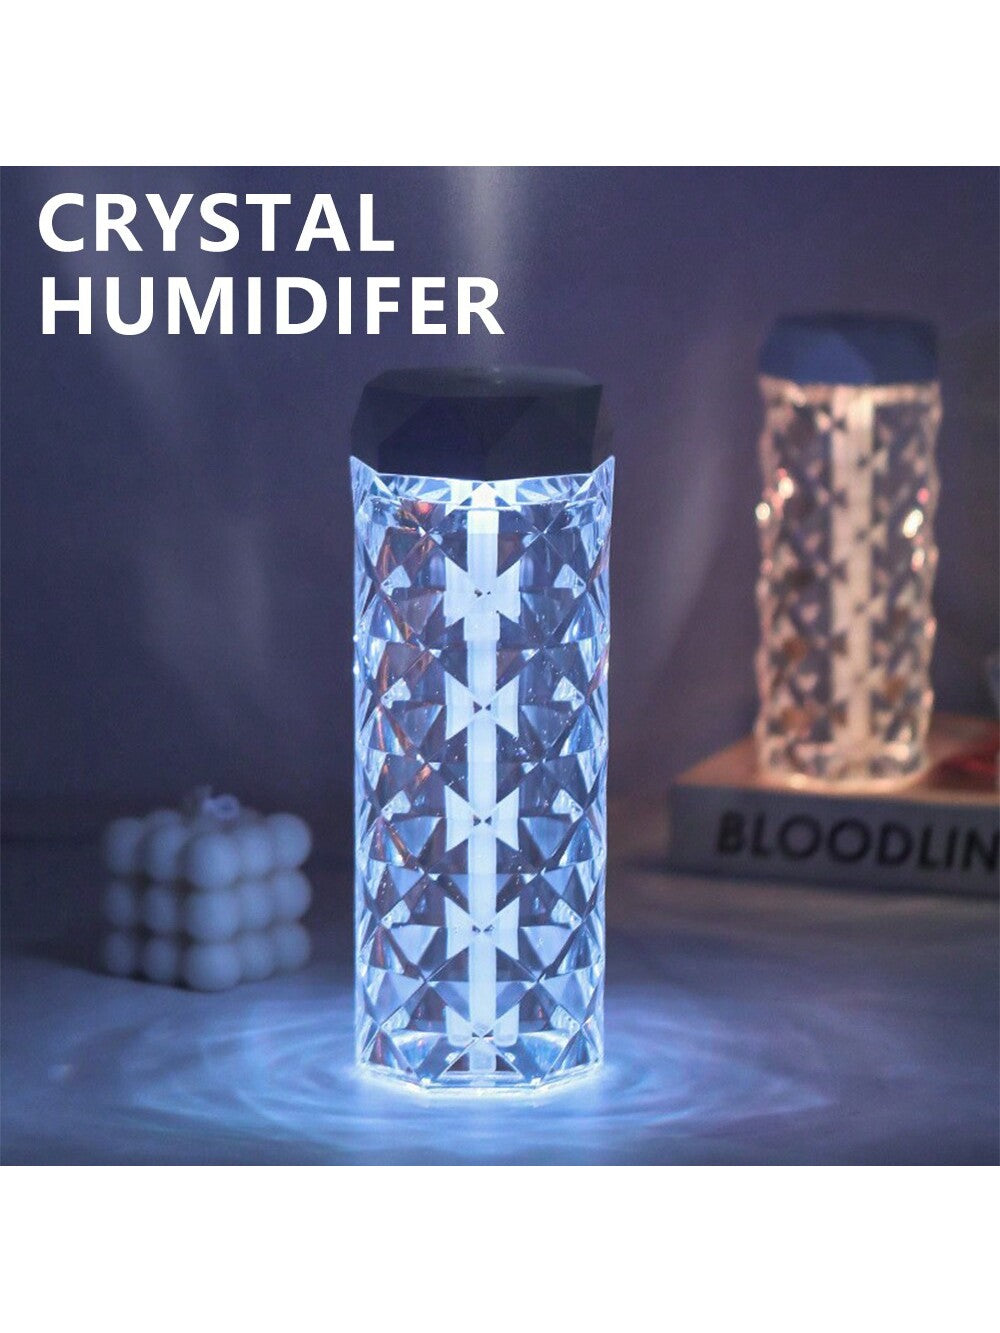 Crystal humidifier home small quiet colorful atmosphere bedroom desktop car USB humidifier high appearance level atmosphere light, bedroom bedside night light air humidifier home quiet bedroom fog amount student dormitory-White-3